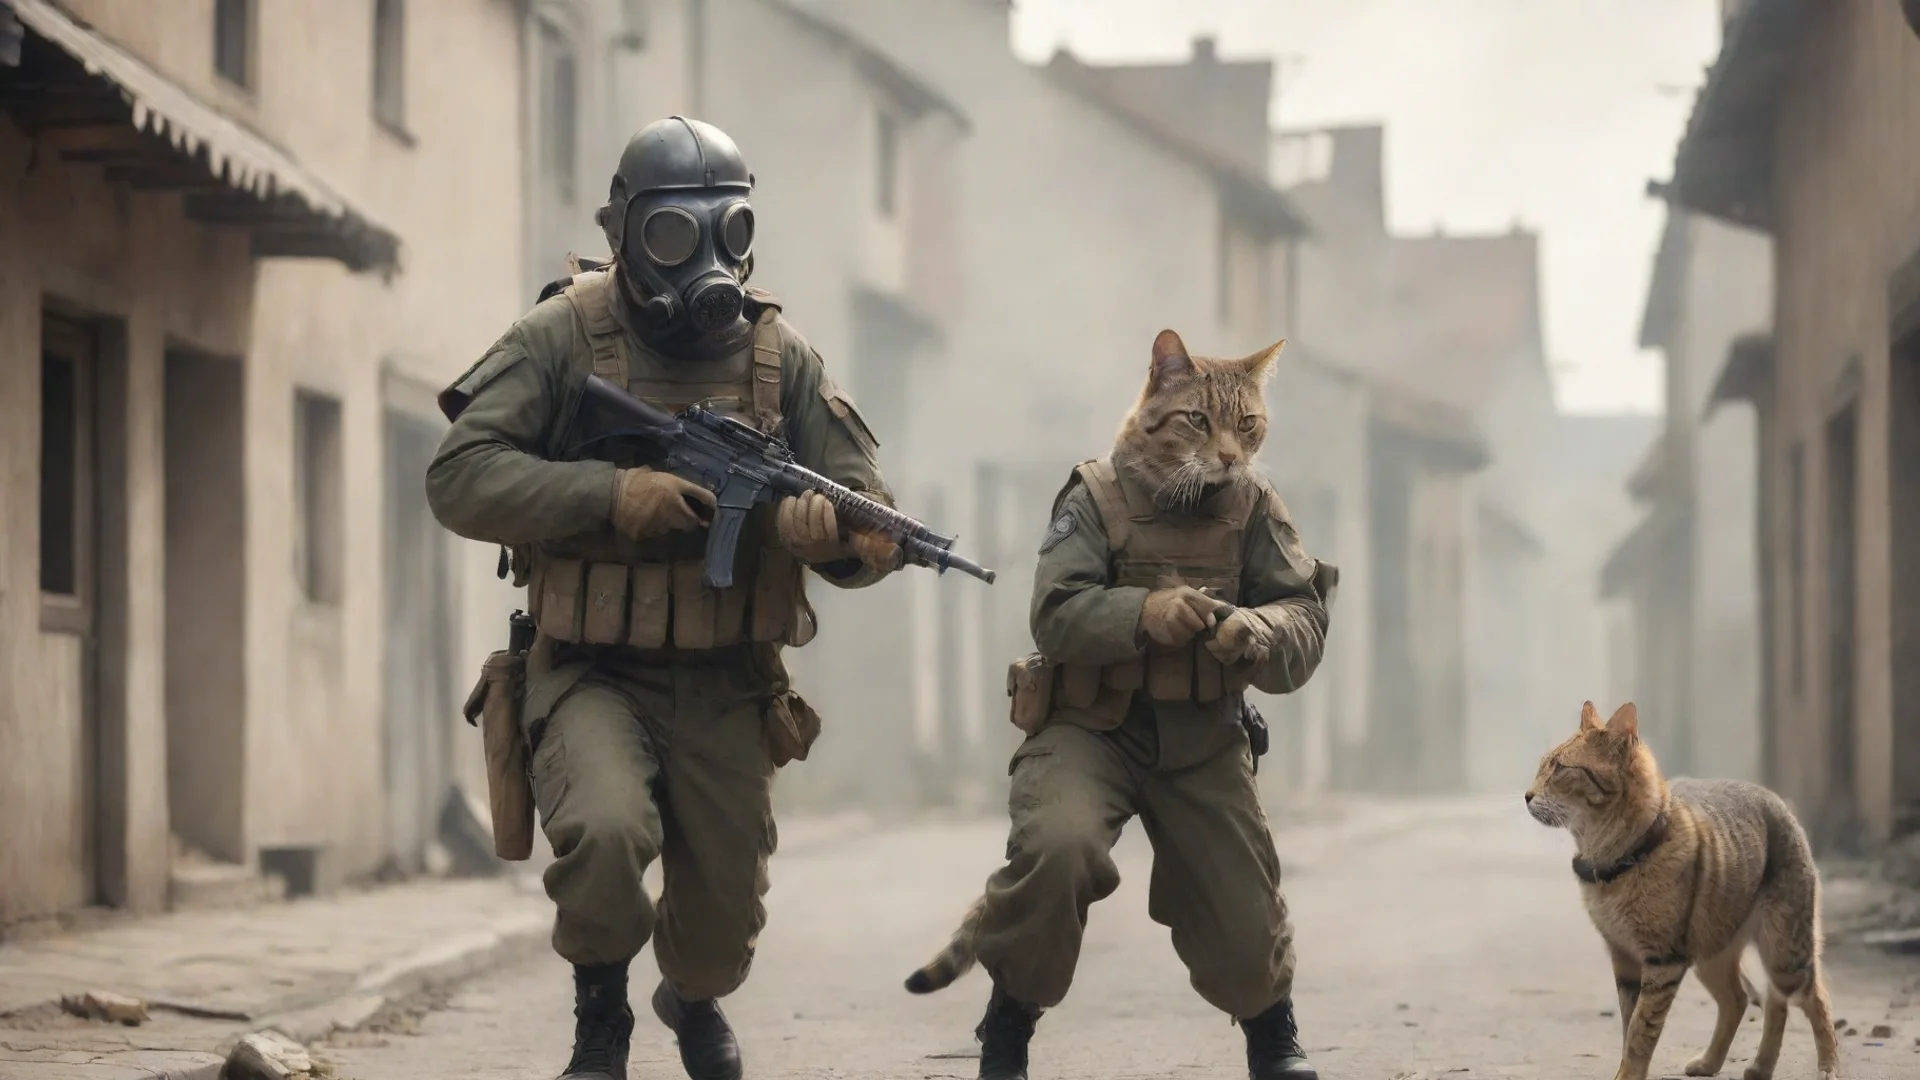 artstation art cat soldier with gas mask shooting dog soldier in a small town confident engaging wow 3 wide